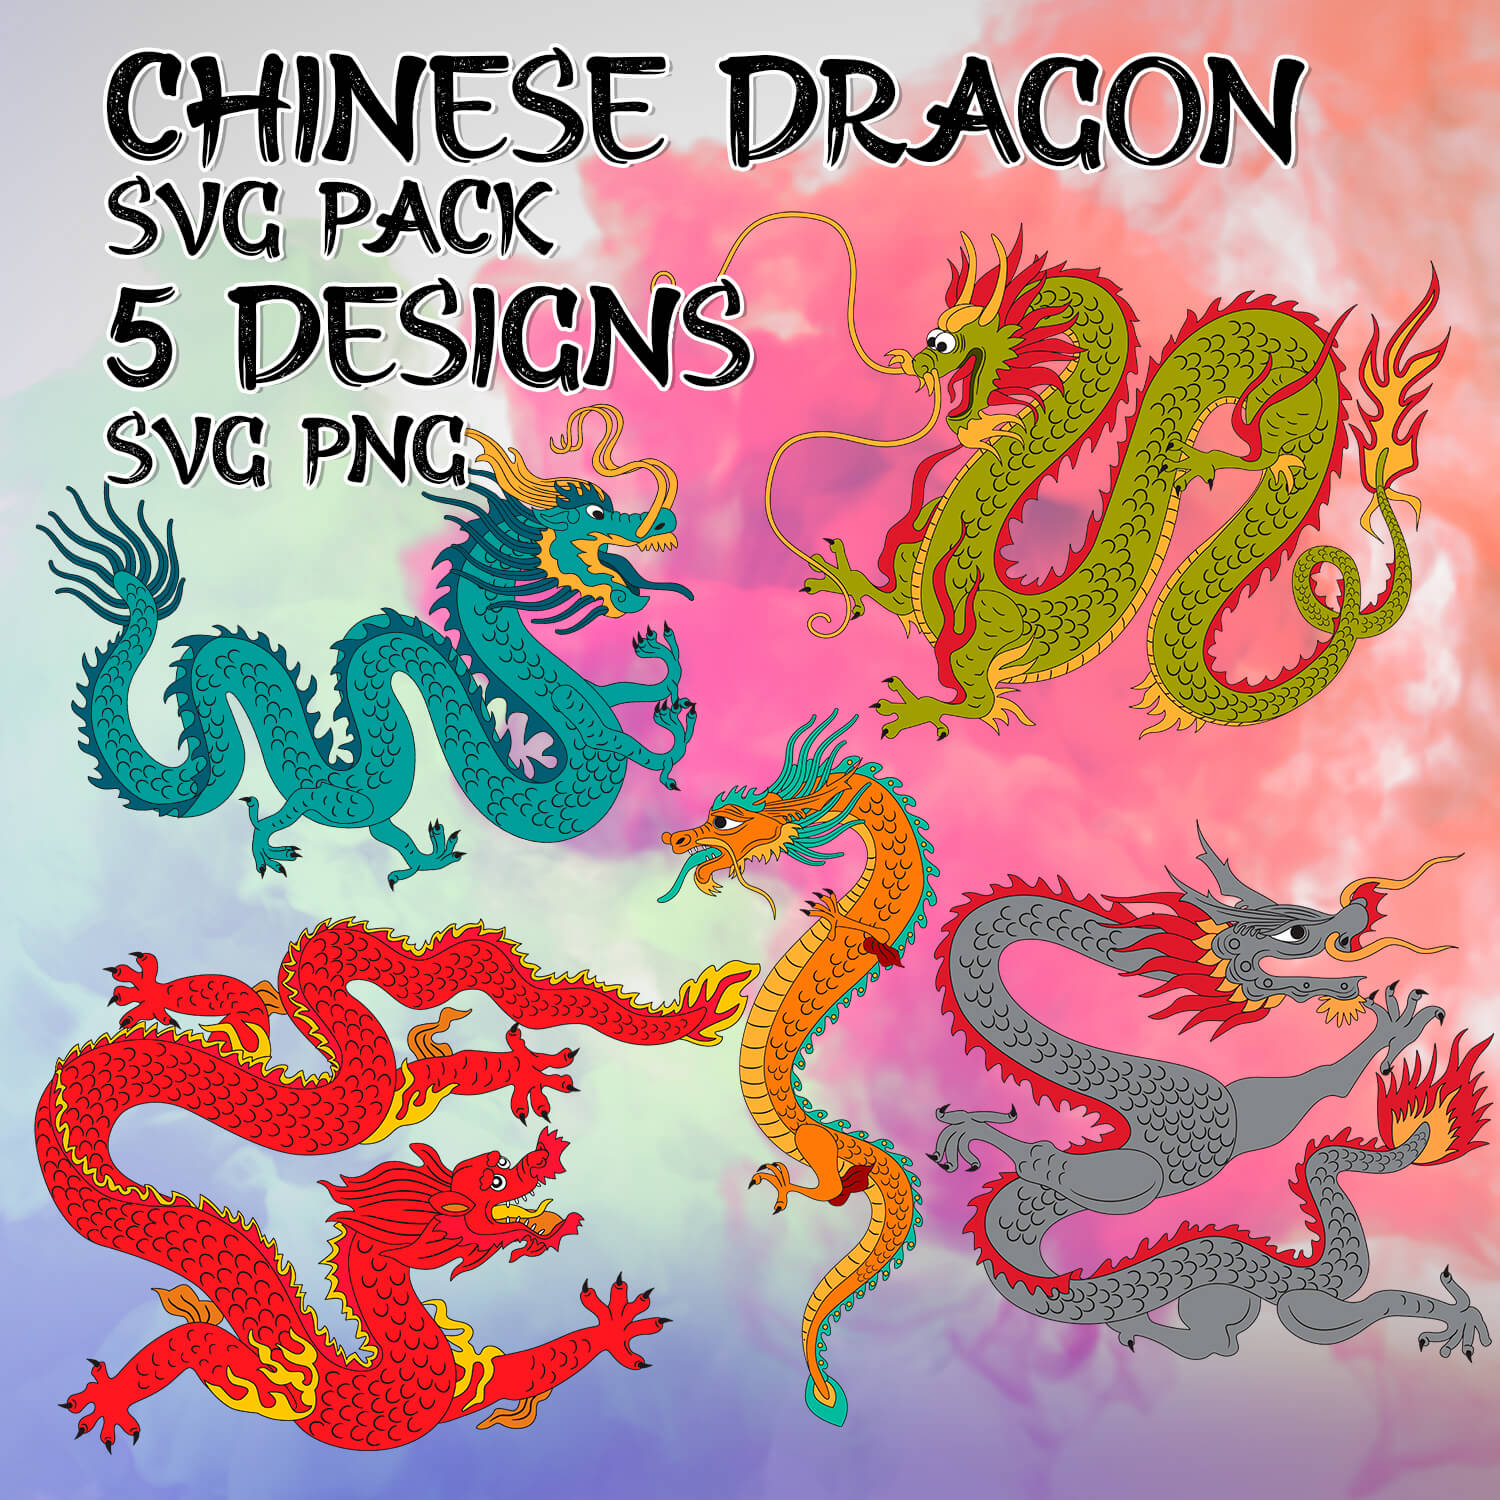 5 designs of colorful Chinese dragons.